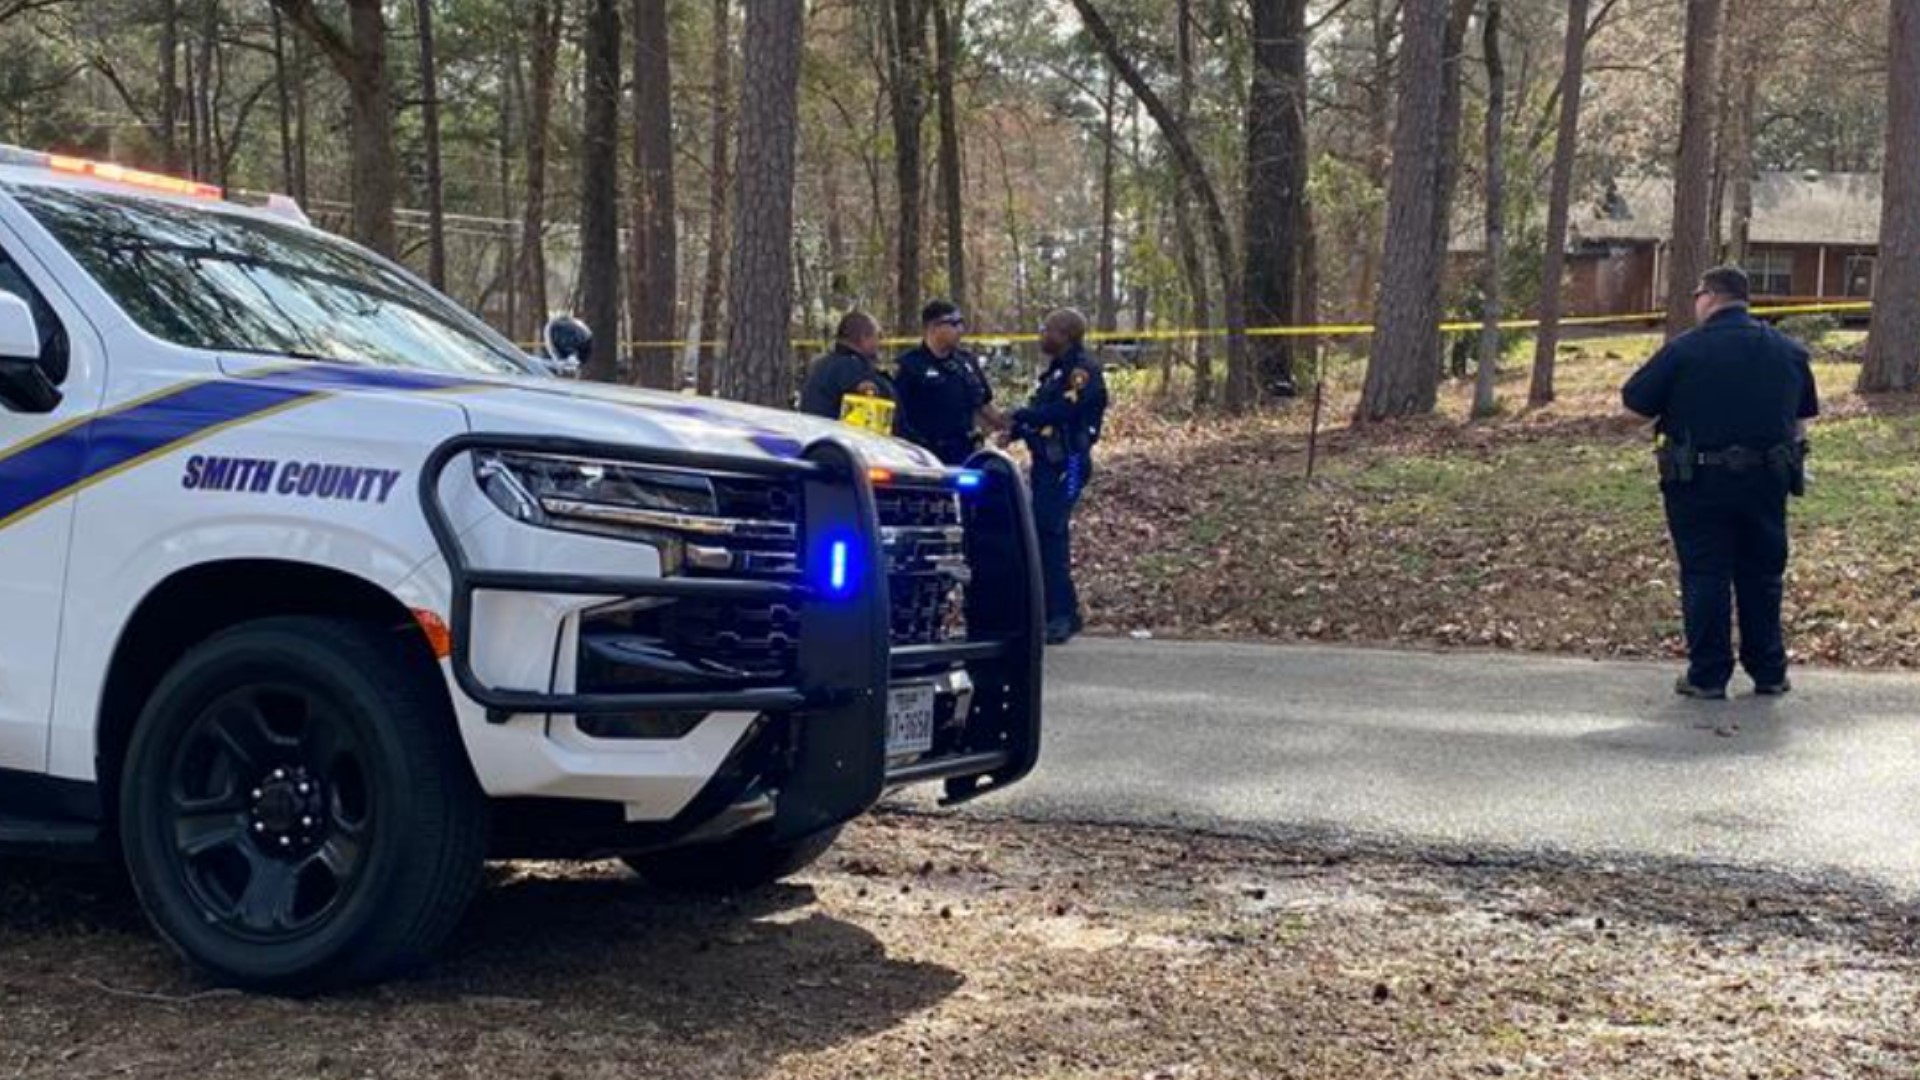 Mark Correro was shot and killed after confronting a man and woman at their Smith County home and telling them that their truck belonged to him, deputies said.